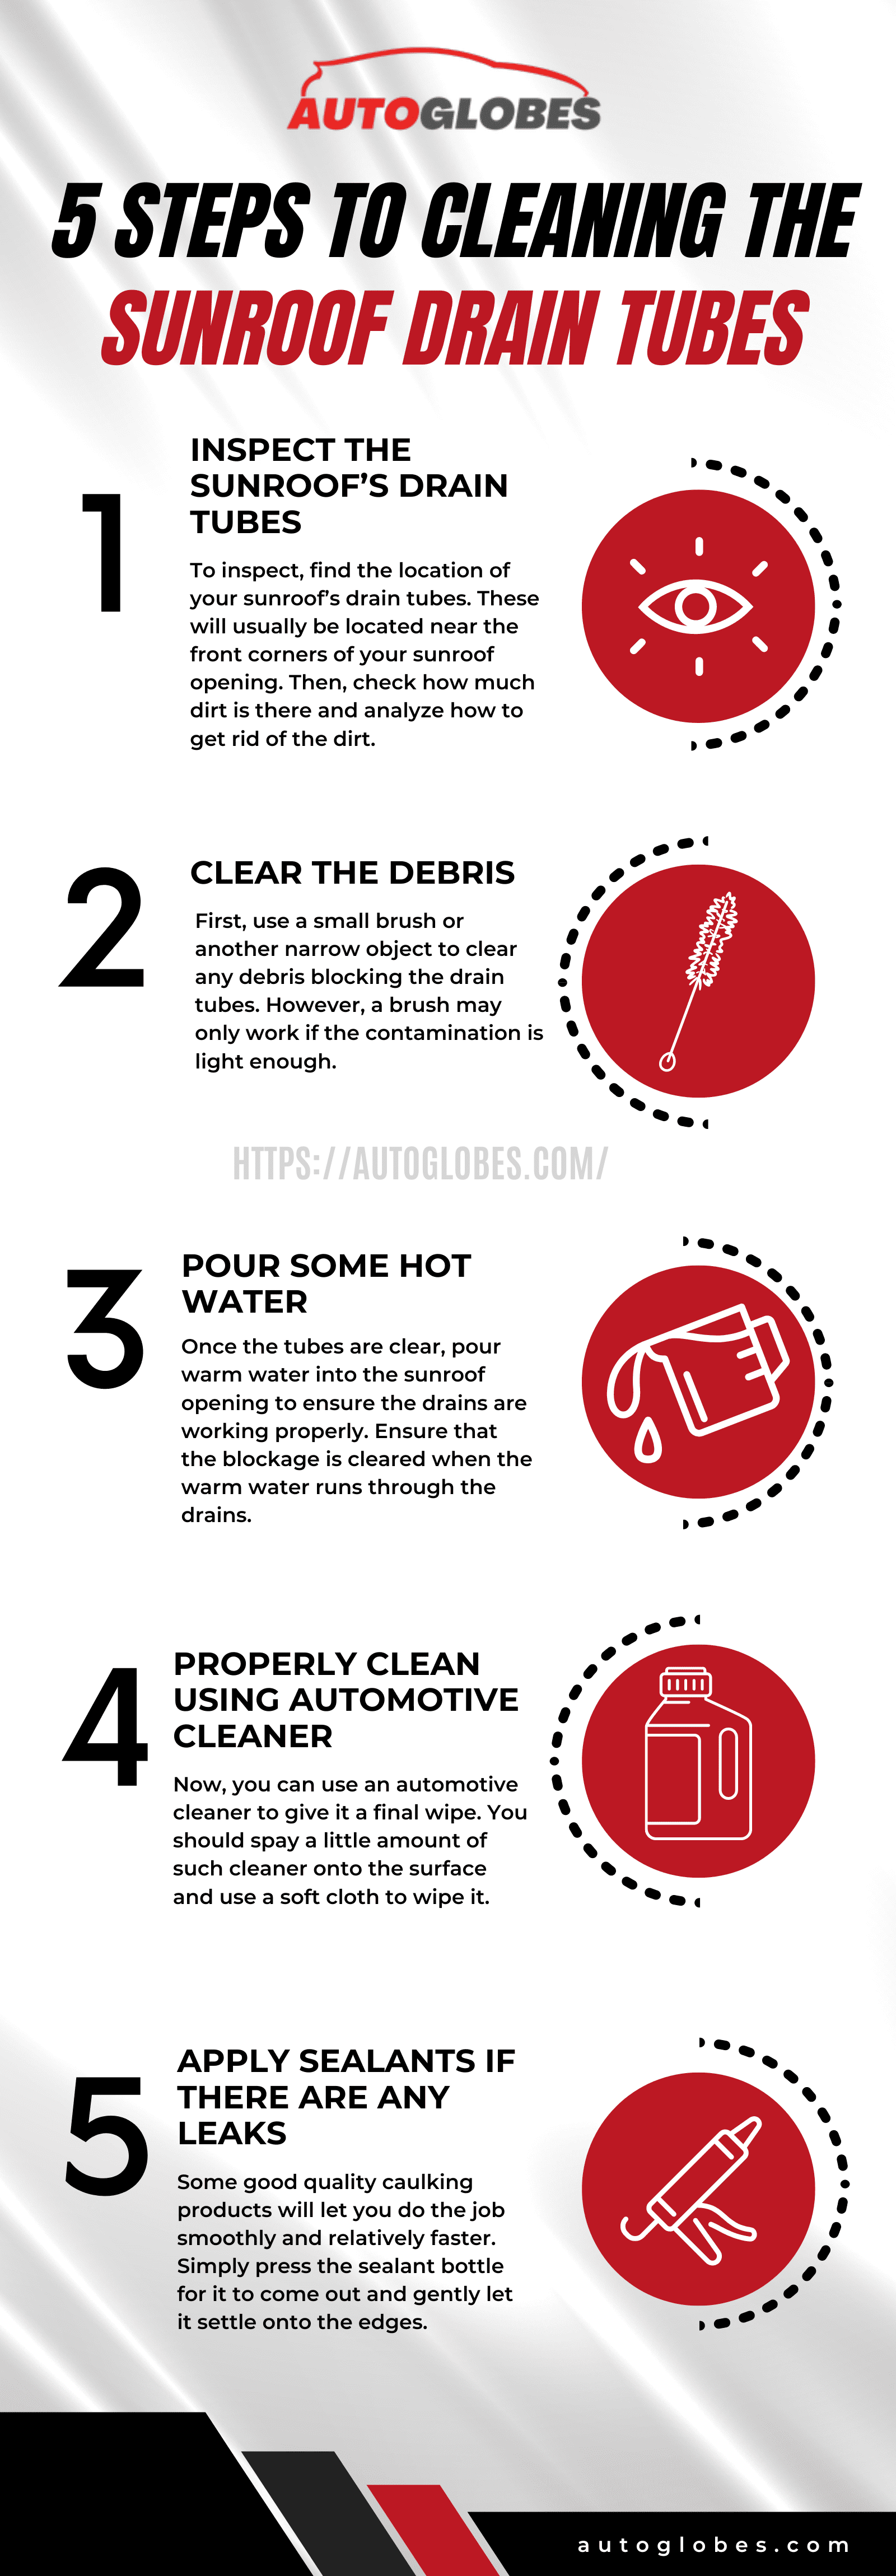 5 Steps To Cleaning The Sunroof Drain Tubes Infographic